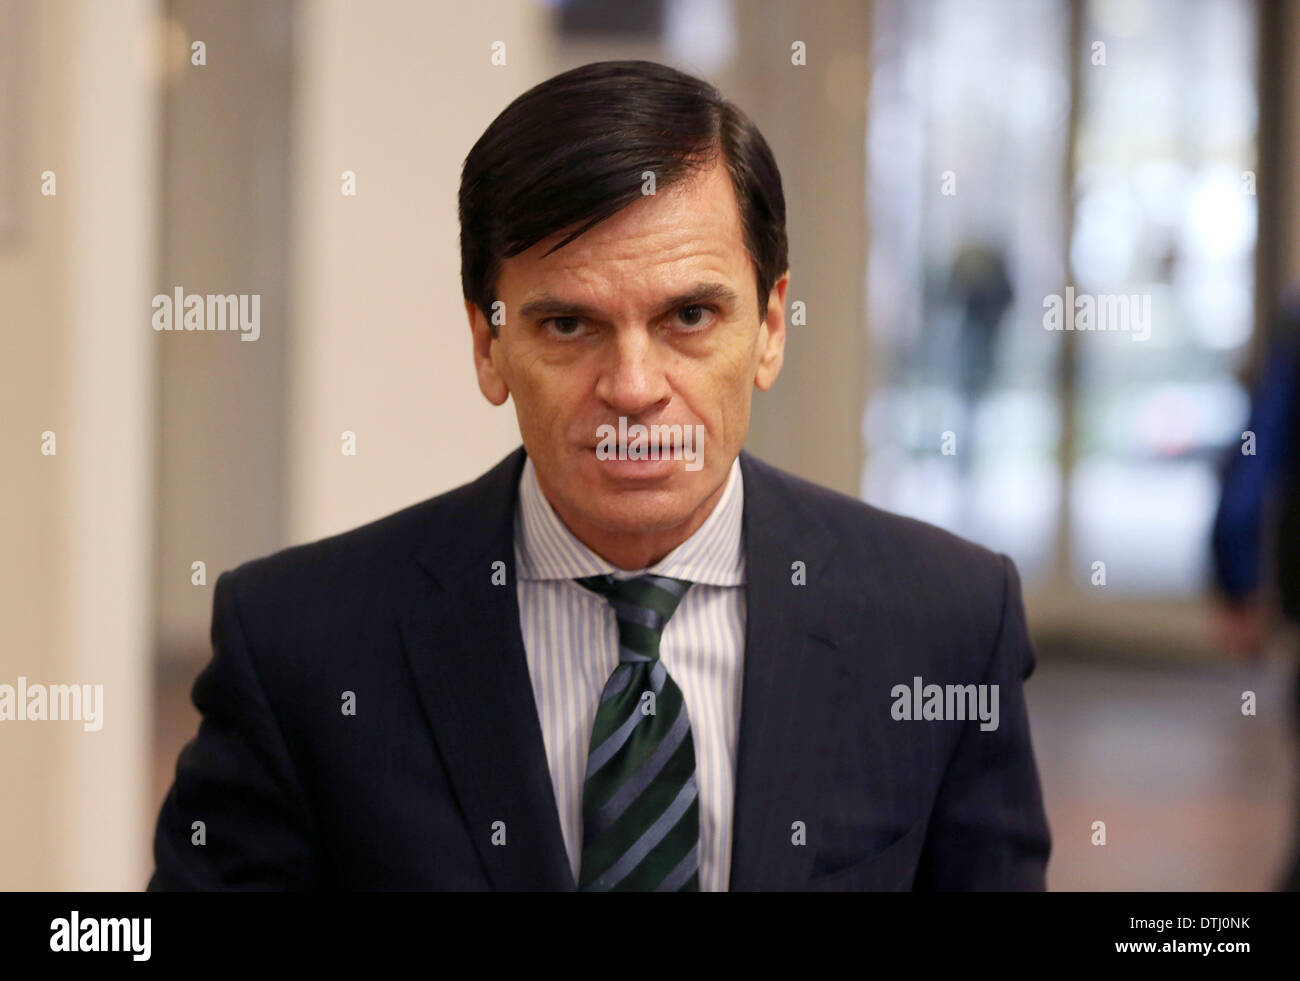 Cologne, Germany. 19th Feb, 2014. The head of investment bank Goldman Sachs in Germany, Alexander Dibelius, arrives at the court room of the district court in Cologne, Germany, 19 February 2014. Dibelius is a witness in the Sal. Oppenheim trial. Photo: OLIVER BERG/dpa/Alamy Live News Stock Photo